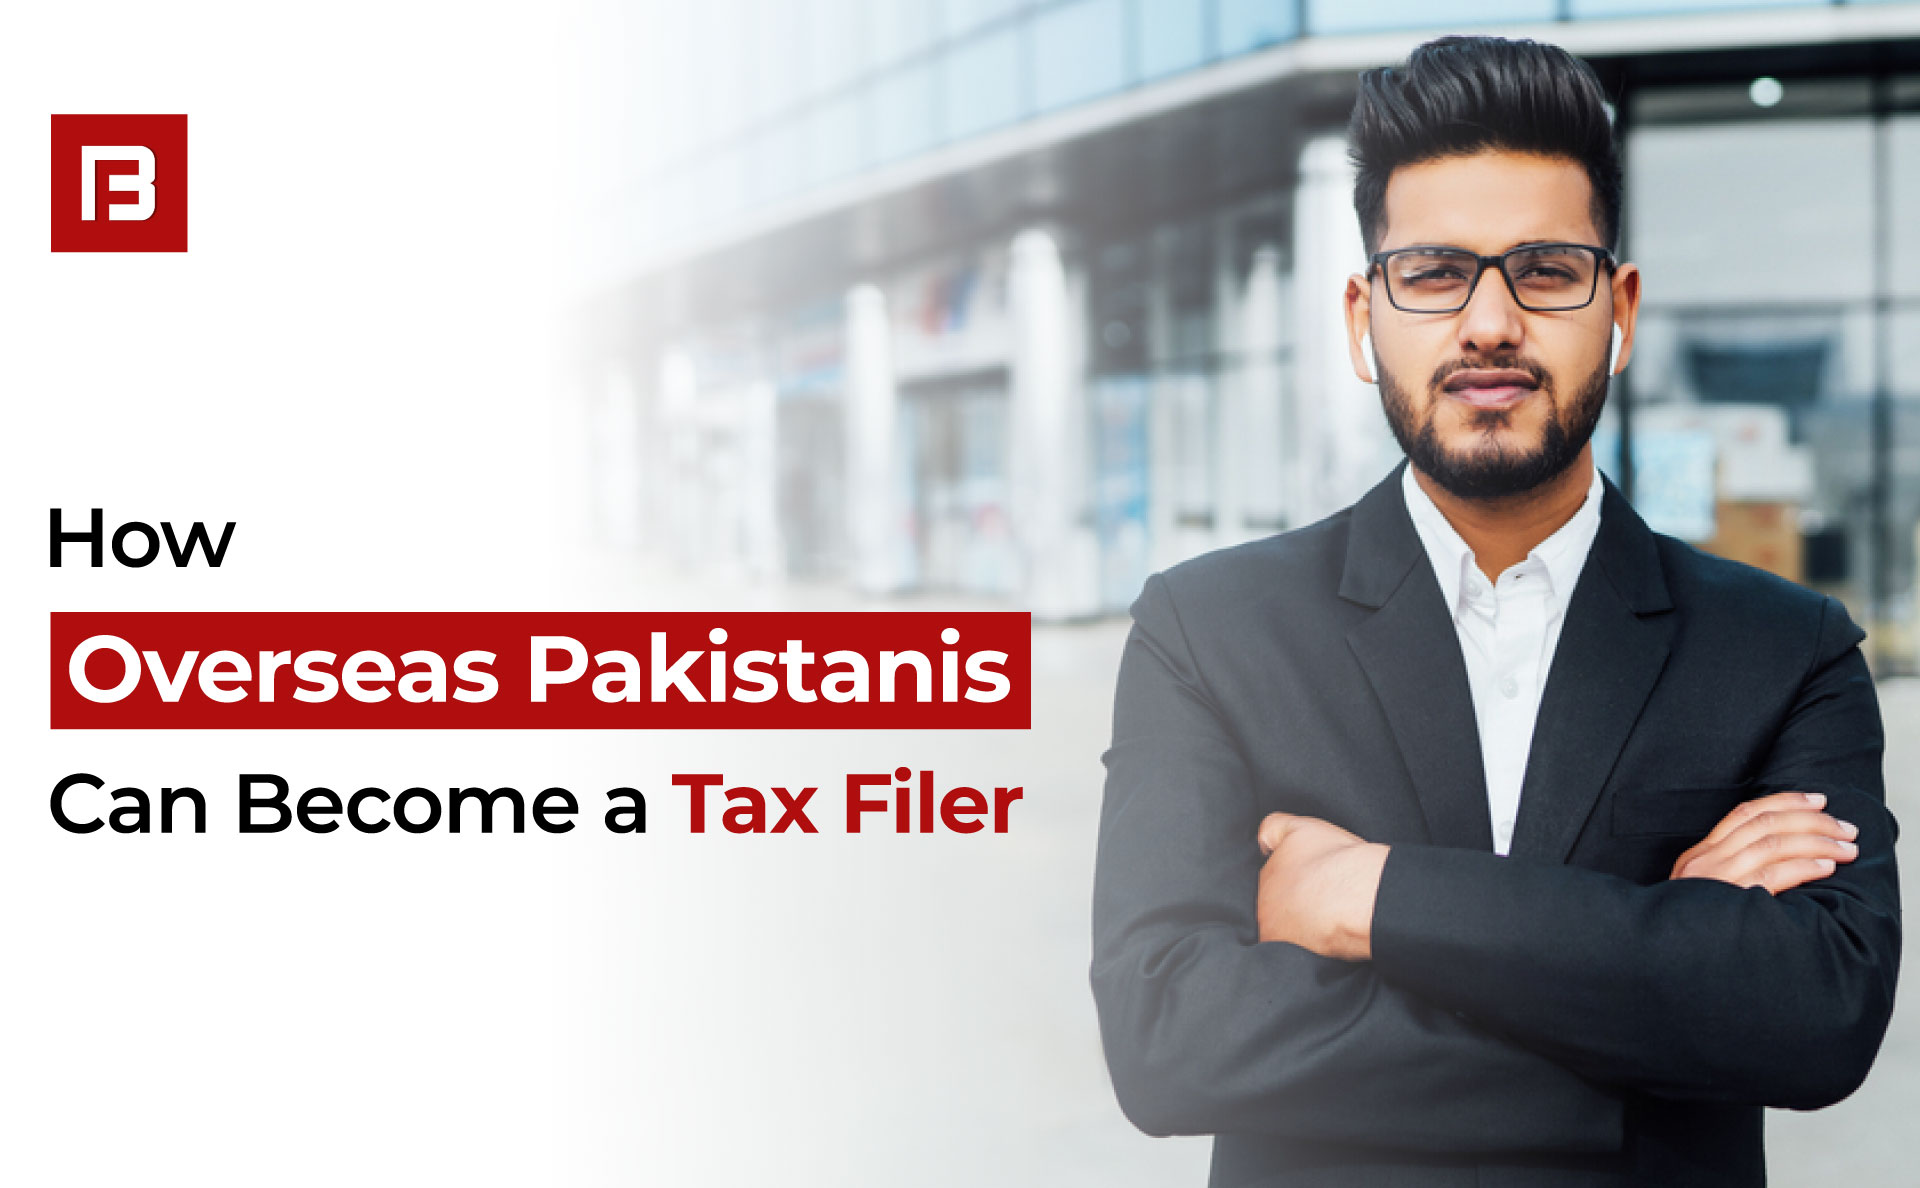 How overseas Pakistanis can become a tax filer